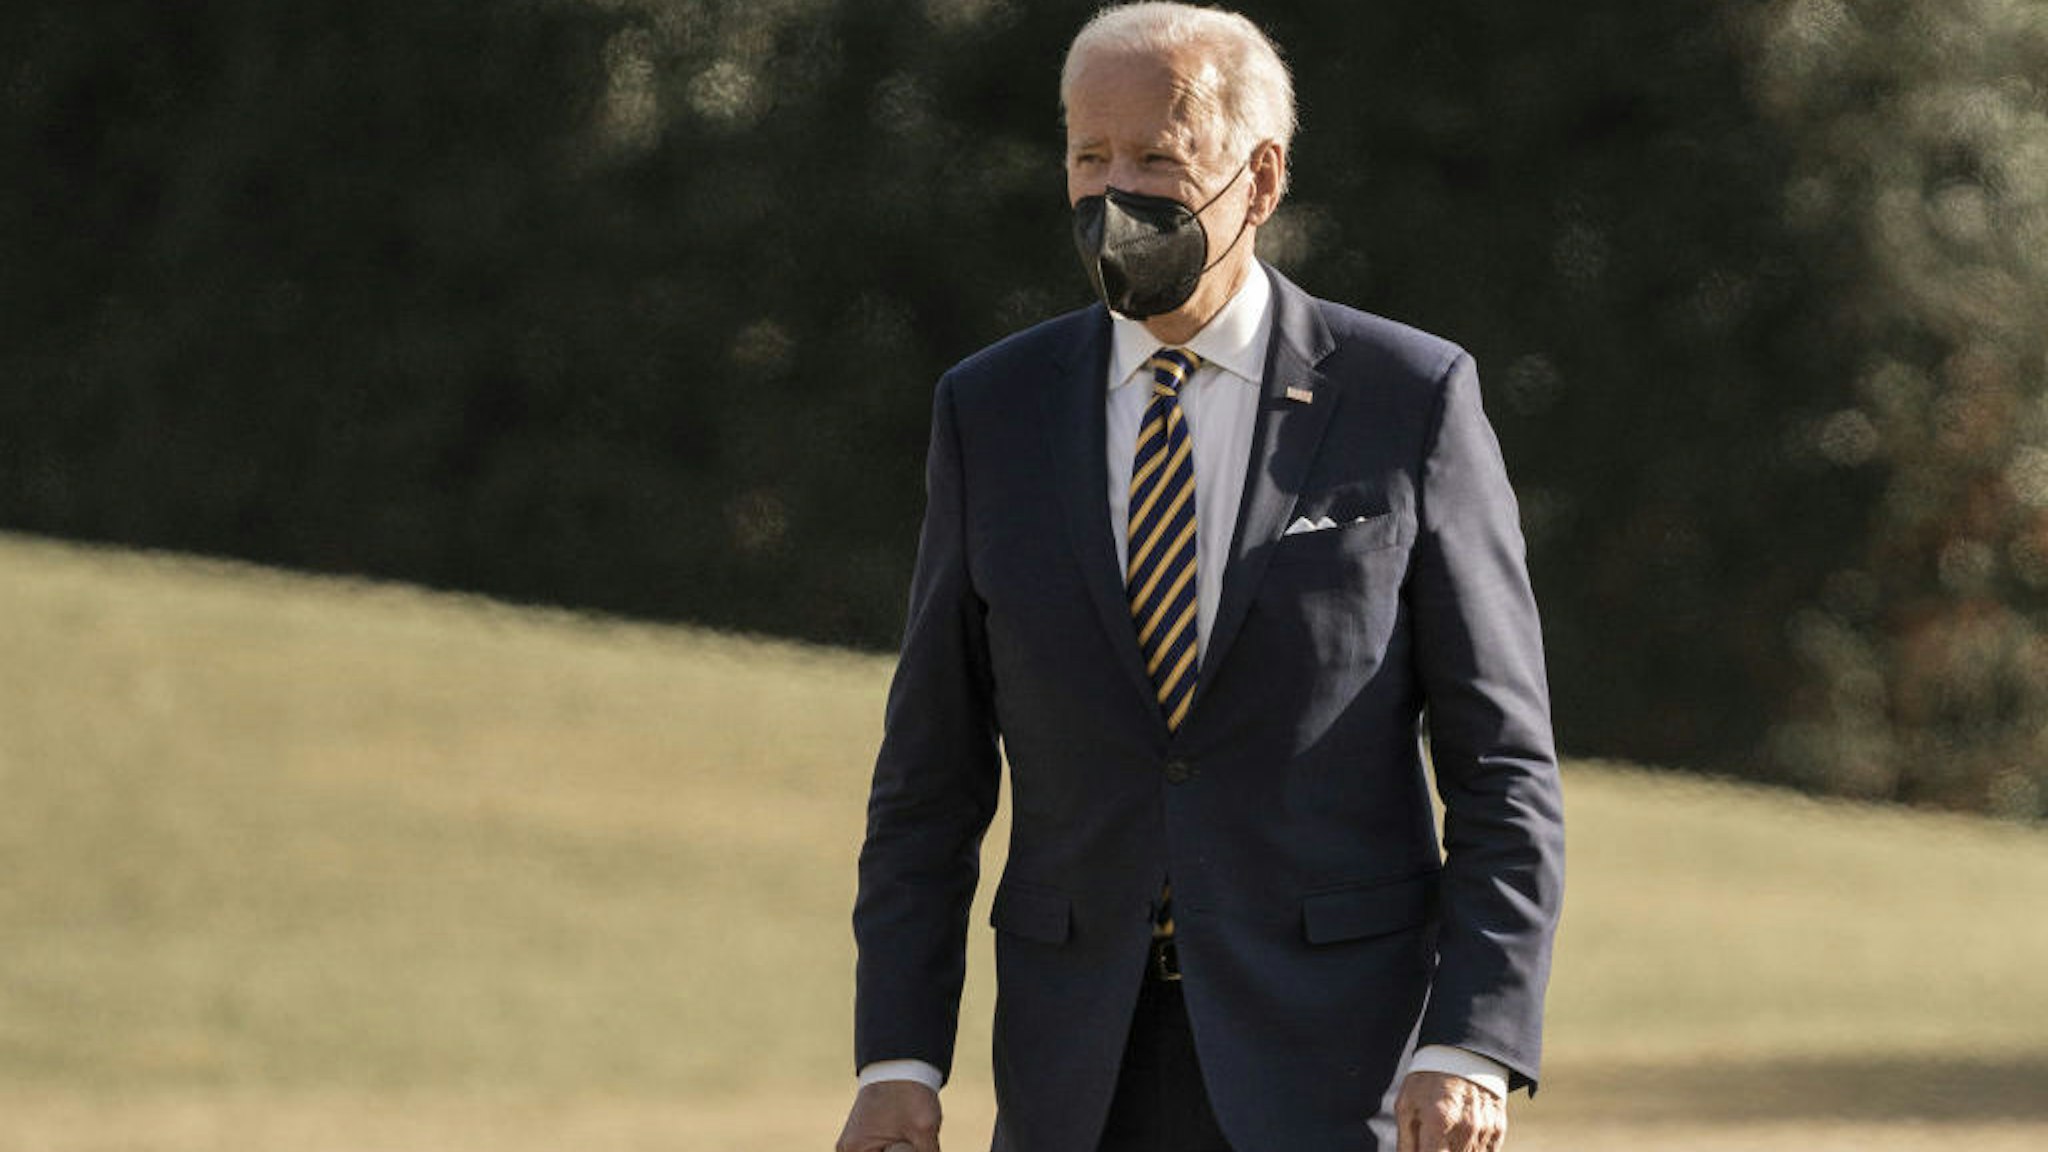 U.S. President Joe Biden walks on the South Lawn of the White House after arriving on Marine One in Washington, D.C., U.S., on Thursday, Feb. 10, 2022. Biden delivered remarks on lowering health care costs at Germanna Community College in Culpeper, Virginia. Photographer: Ken Cedeno/CNP/Bloomberg